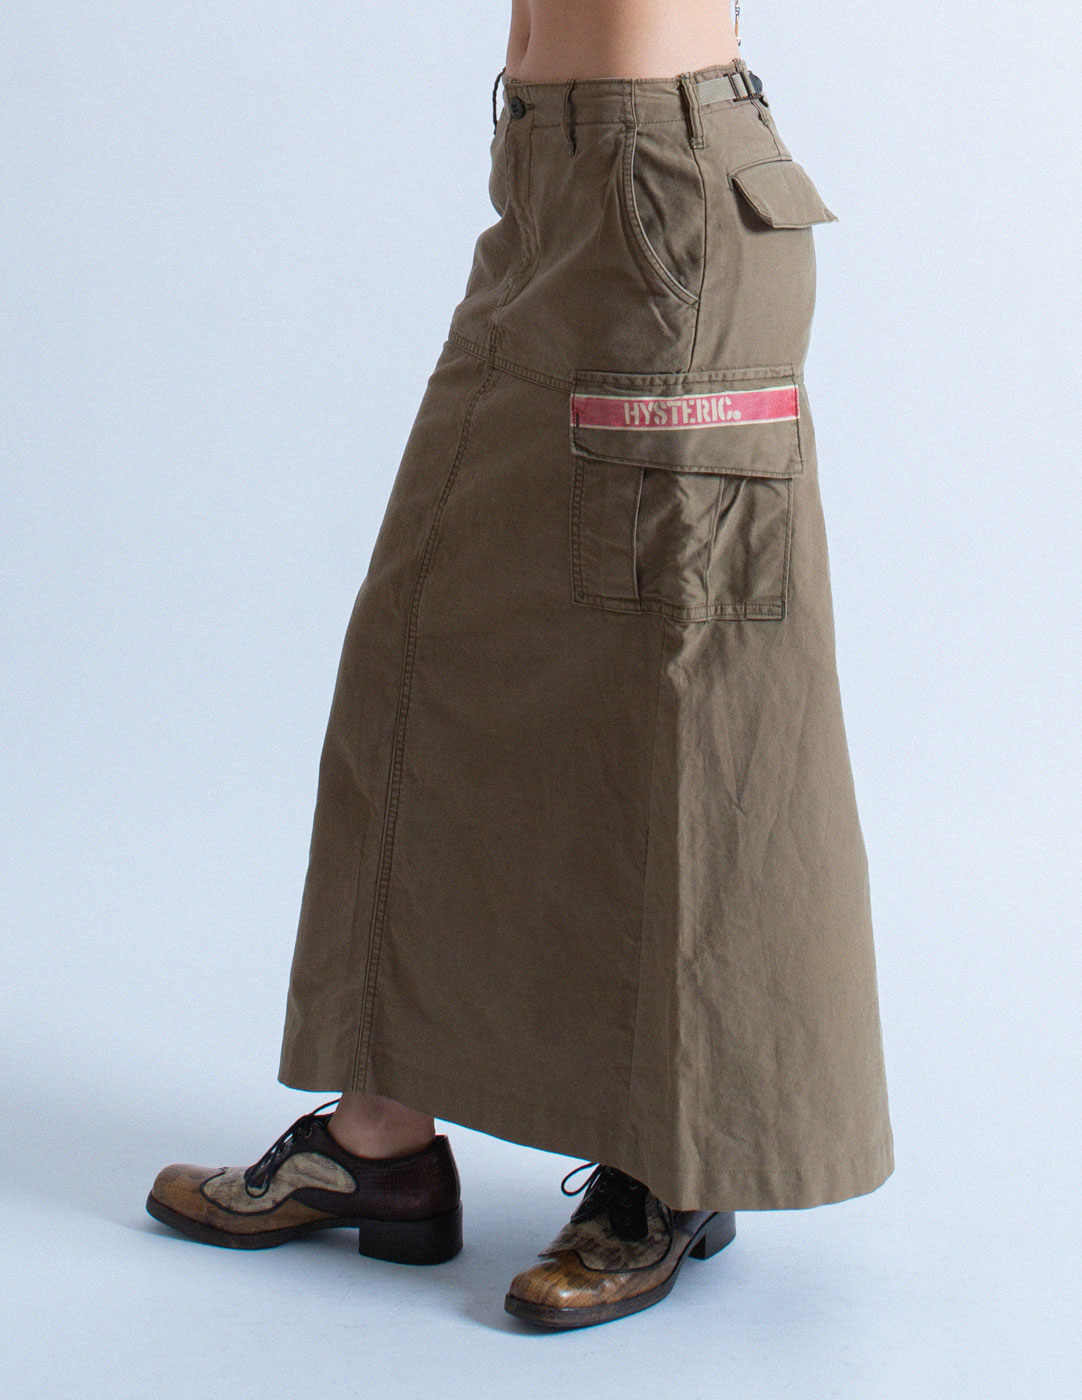 Hysteric Glamour vintage cargo maxi skirt side detail